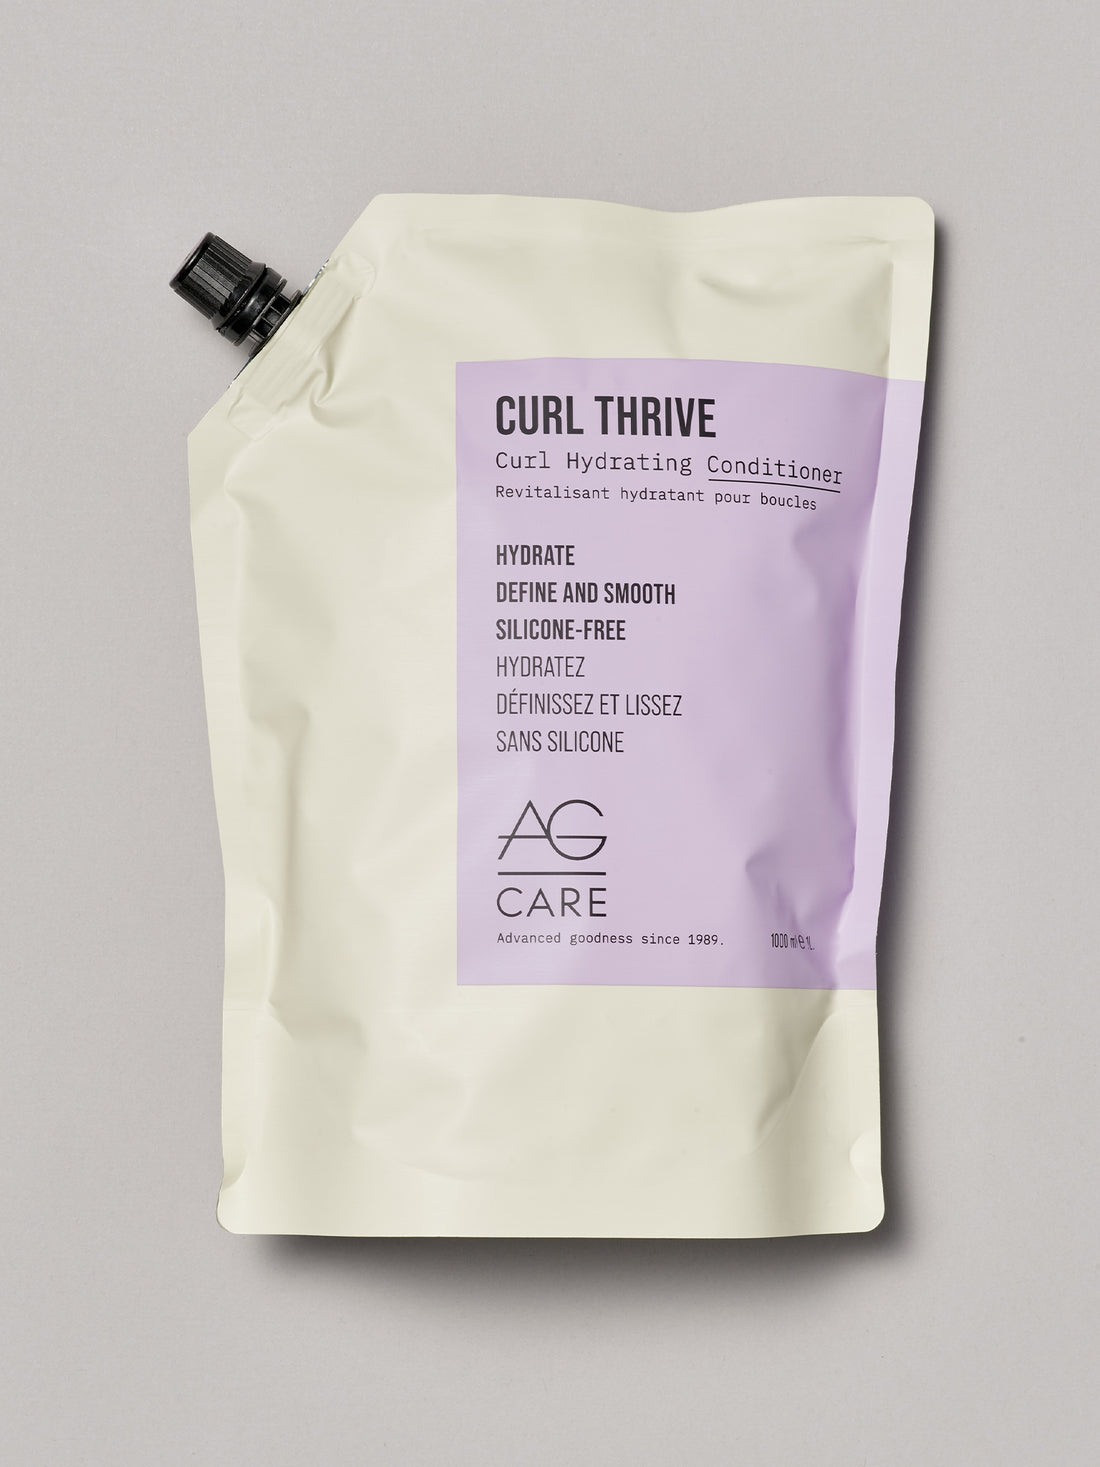 CURL THRIVE Curl Hydrating Conditioner 1L Refill